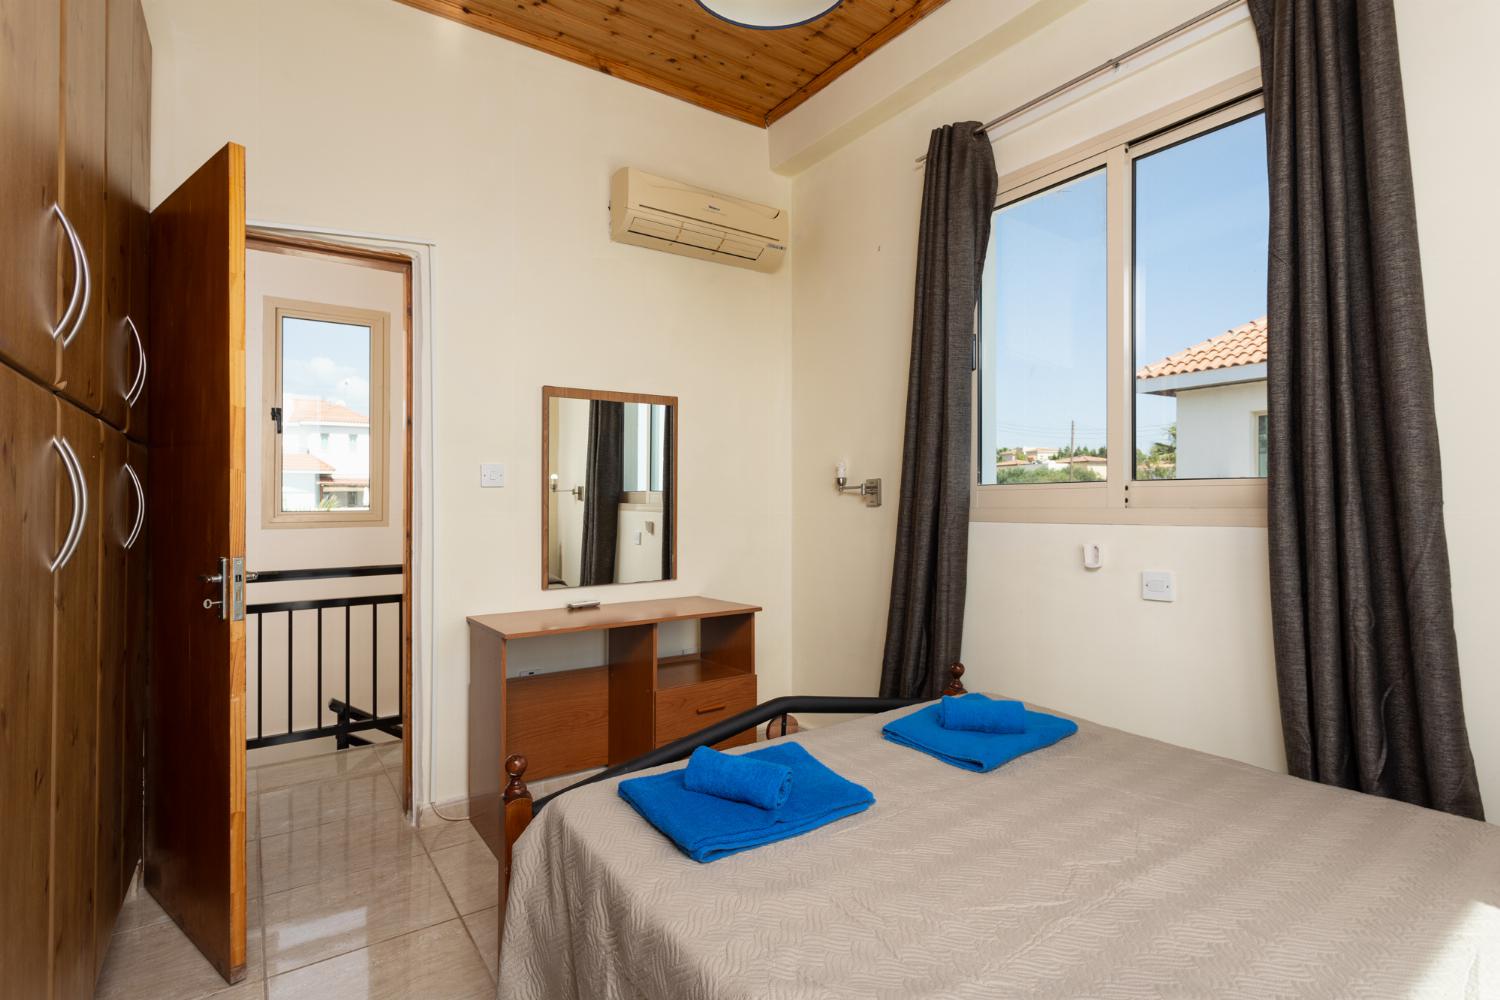 Double bedroom on first floor with en suite bathroom, A/C, sea views, and balcony access